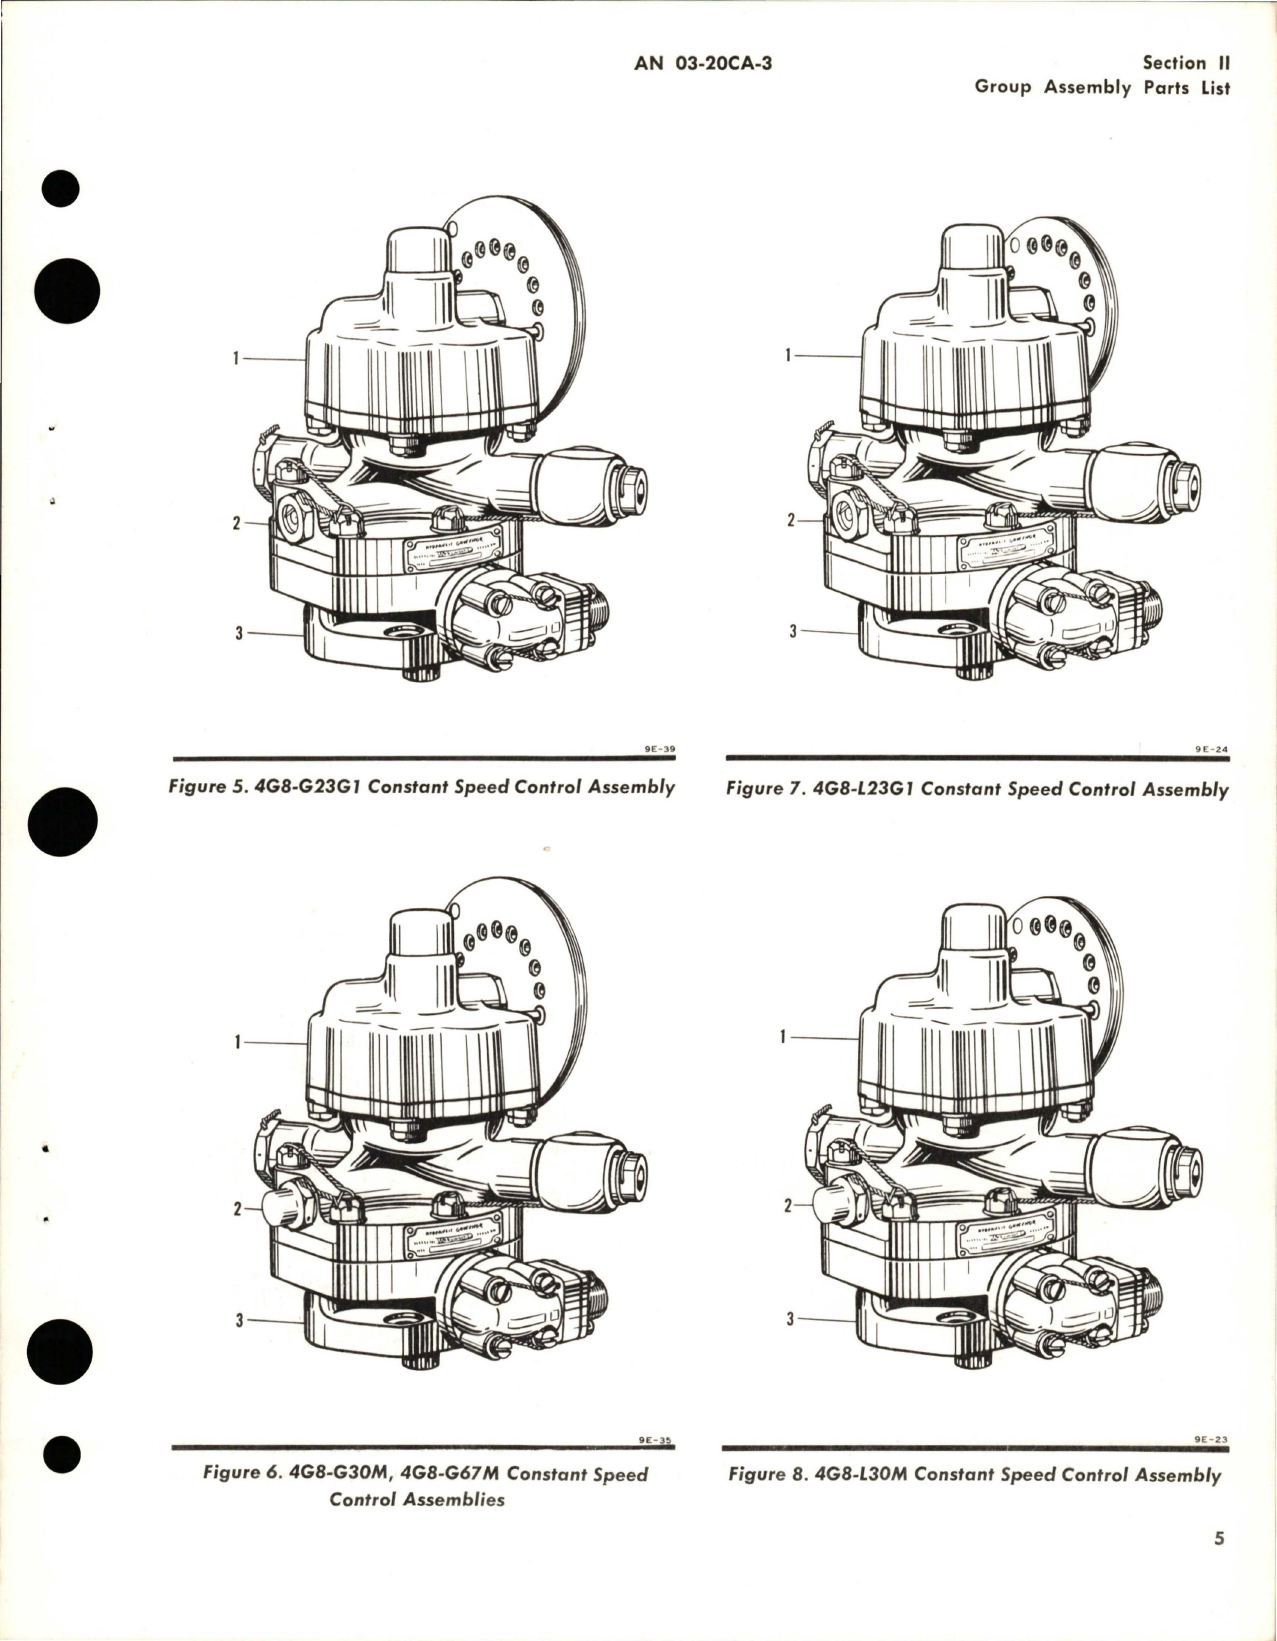 Sample page 9 from AirCorps Library document: Illustrated Parts Breakdown for Single Acting Constant Speed Control Assemblies for Hydromatic Propellers